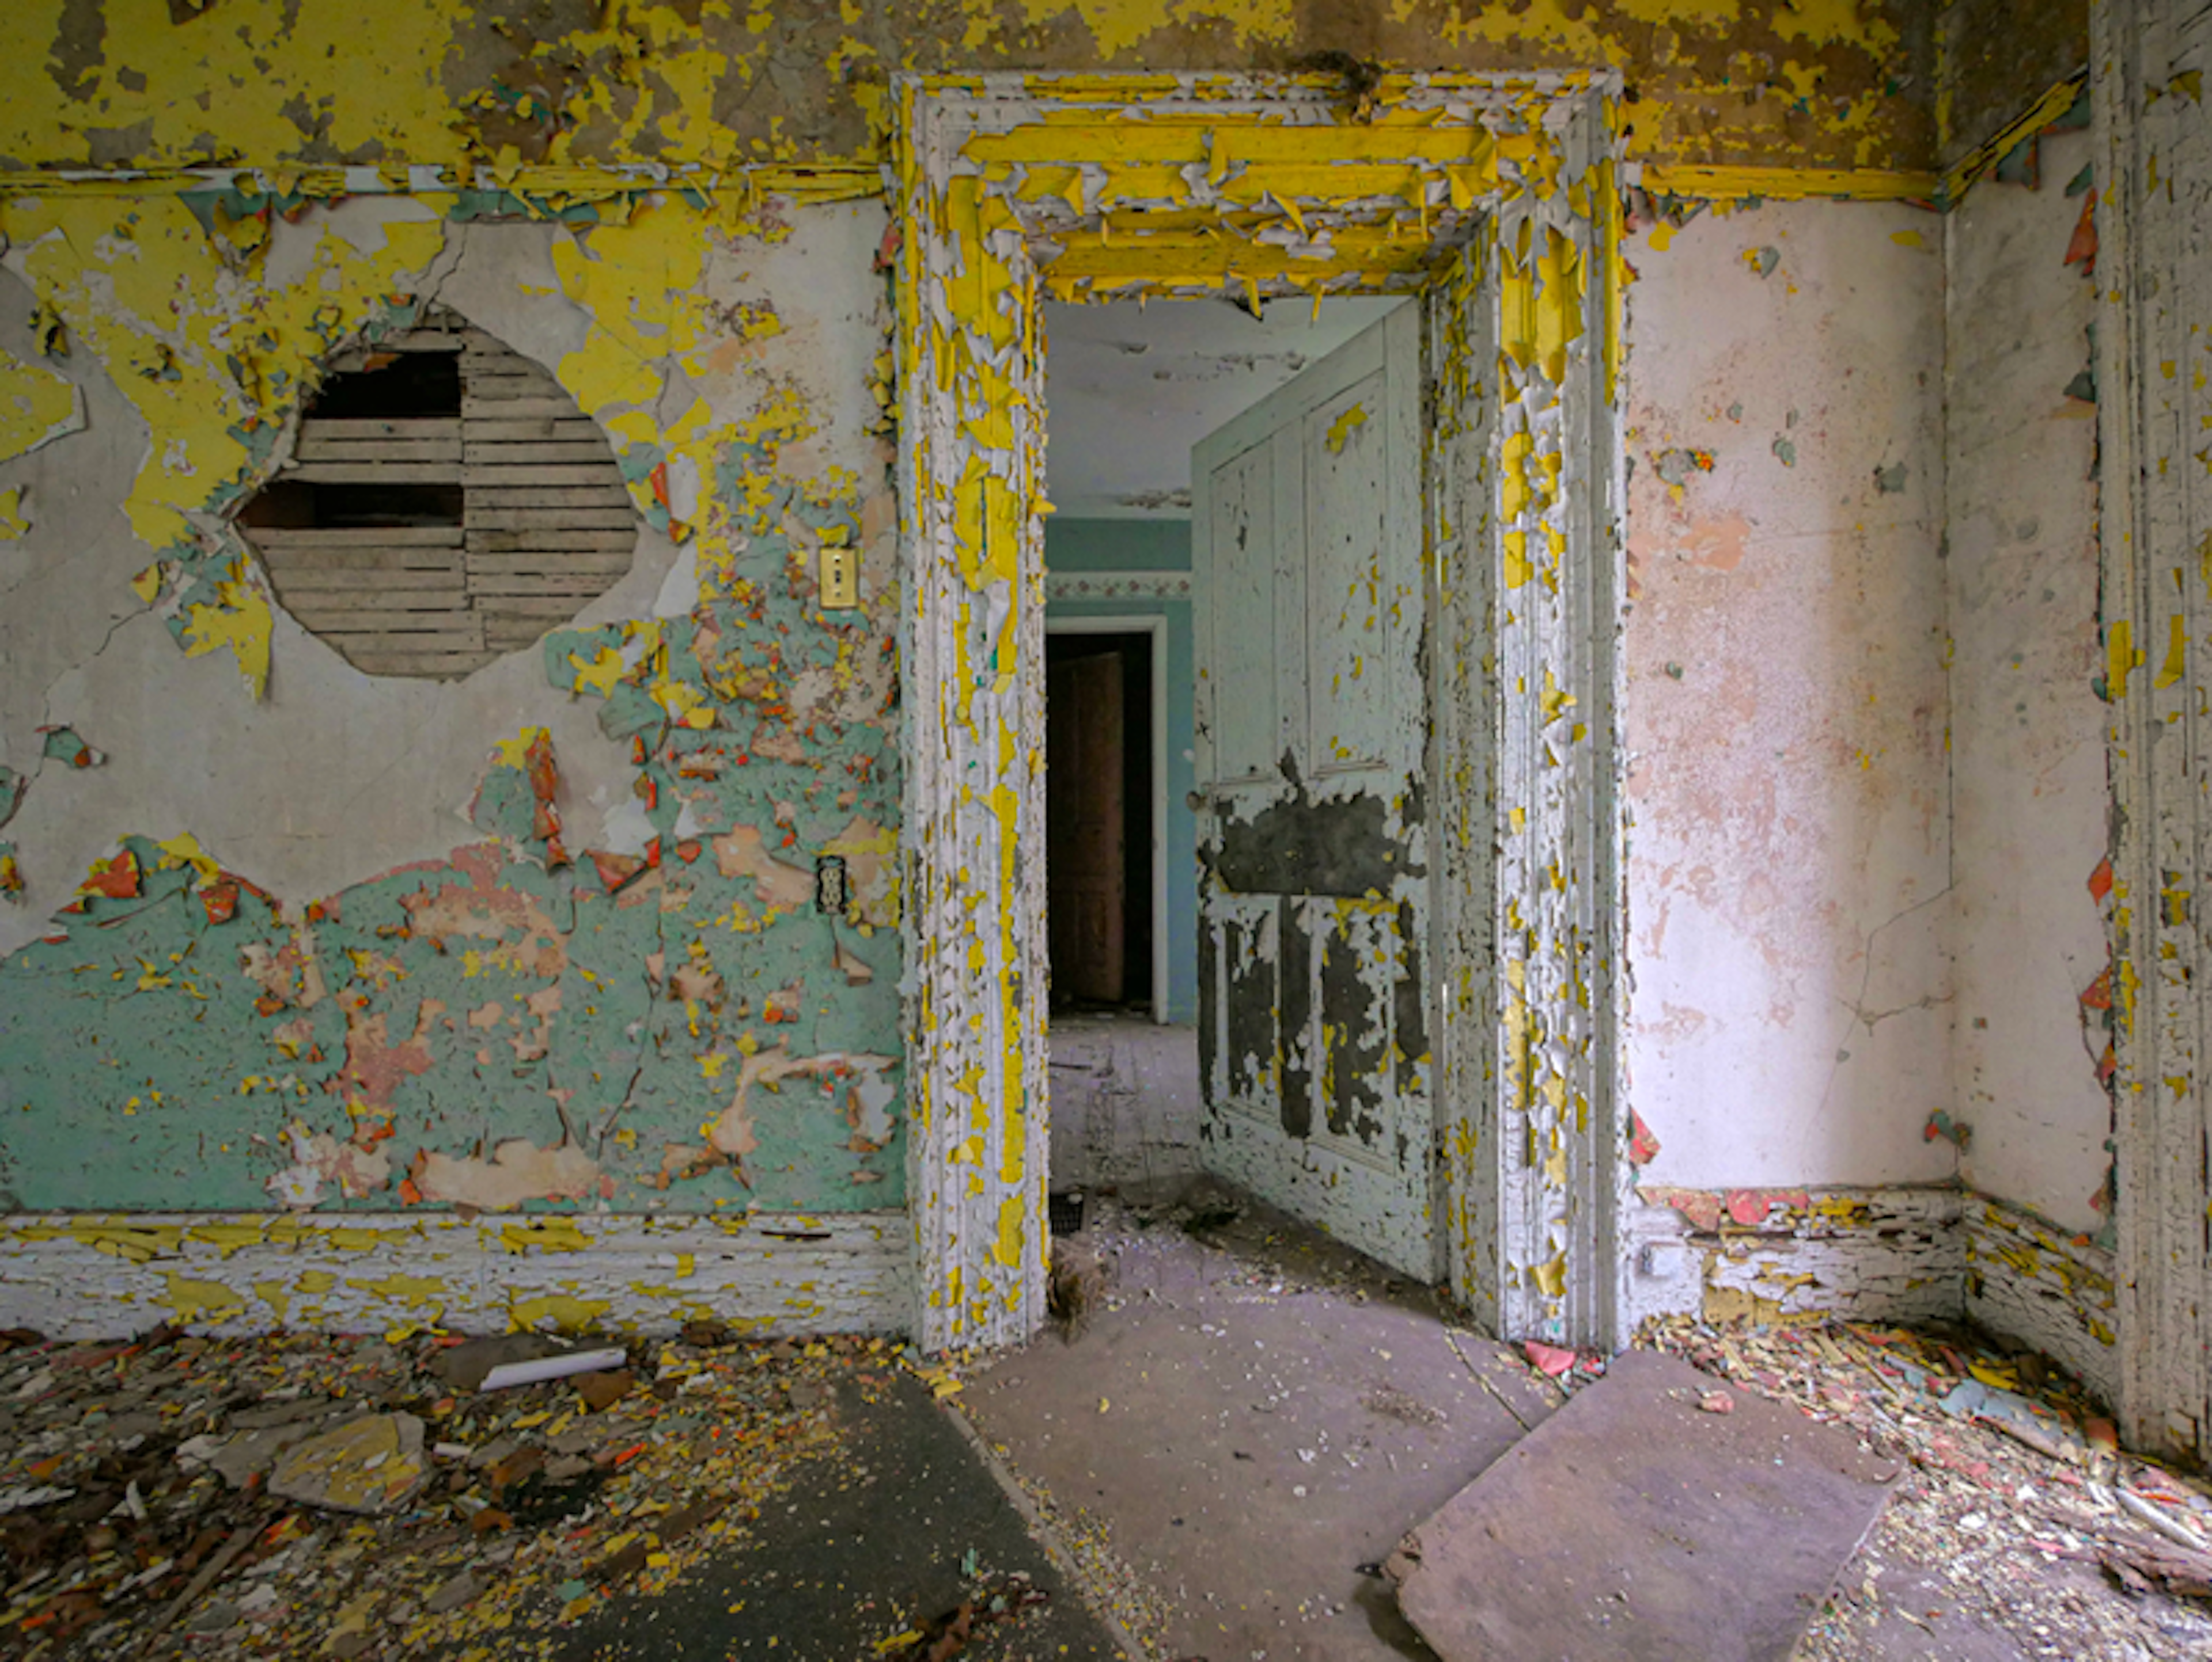 Abandoned house interior with peeling